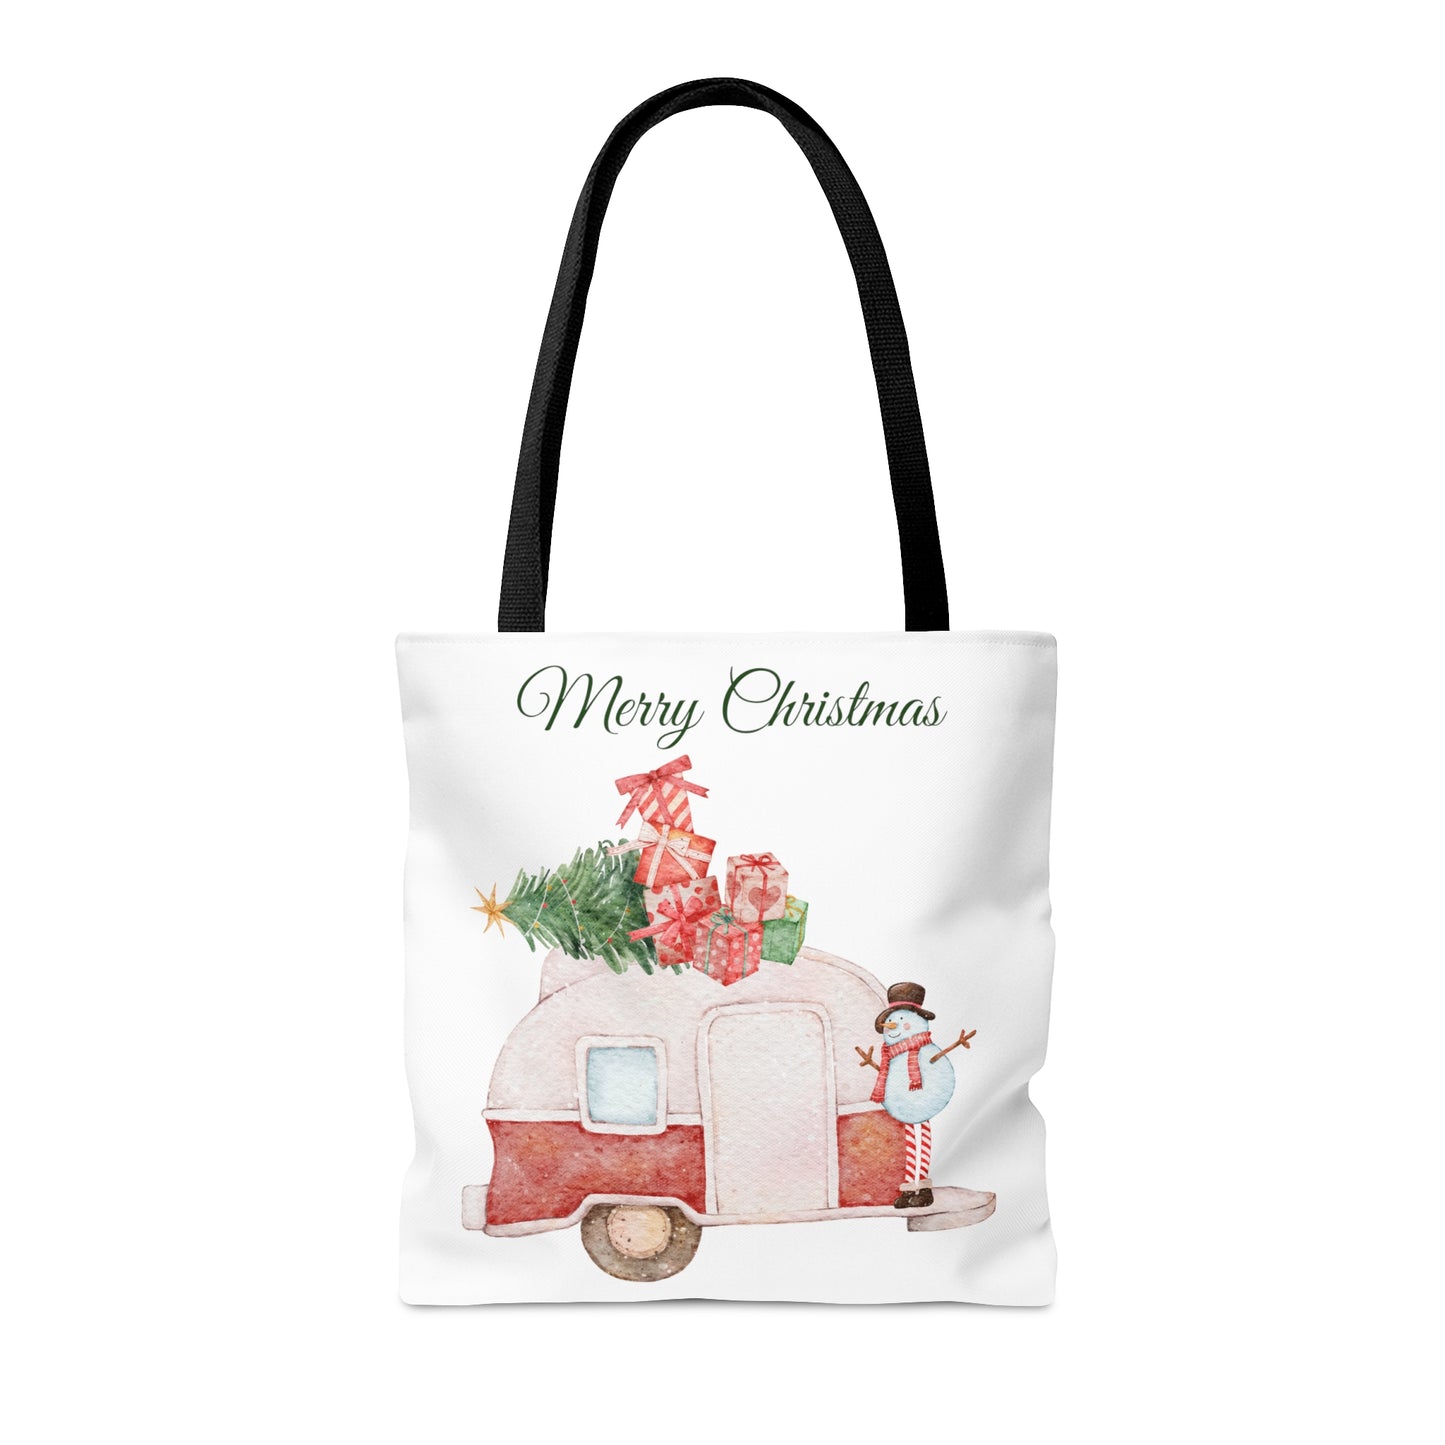 Merry Christmas Printed Tote Bags for Her & Him